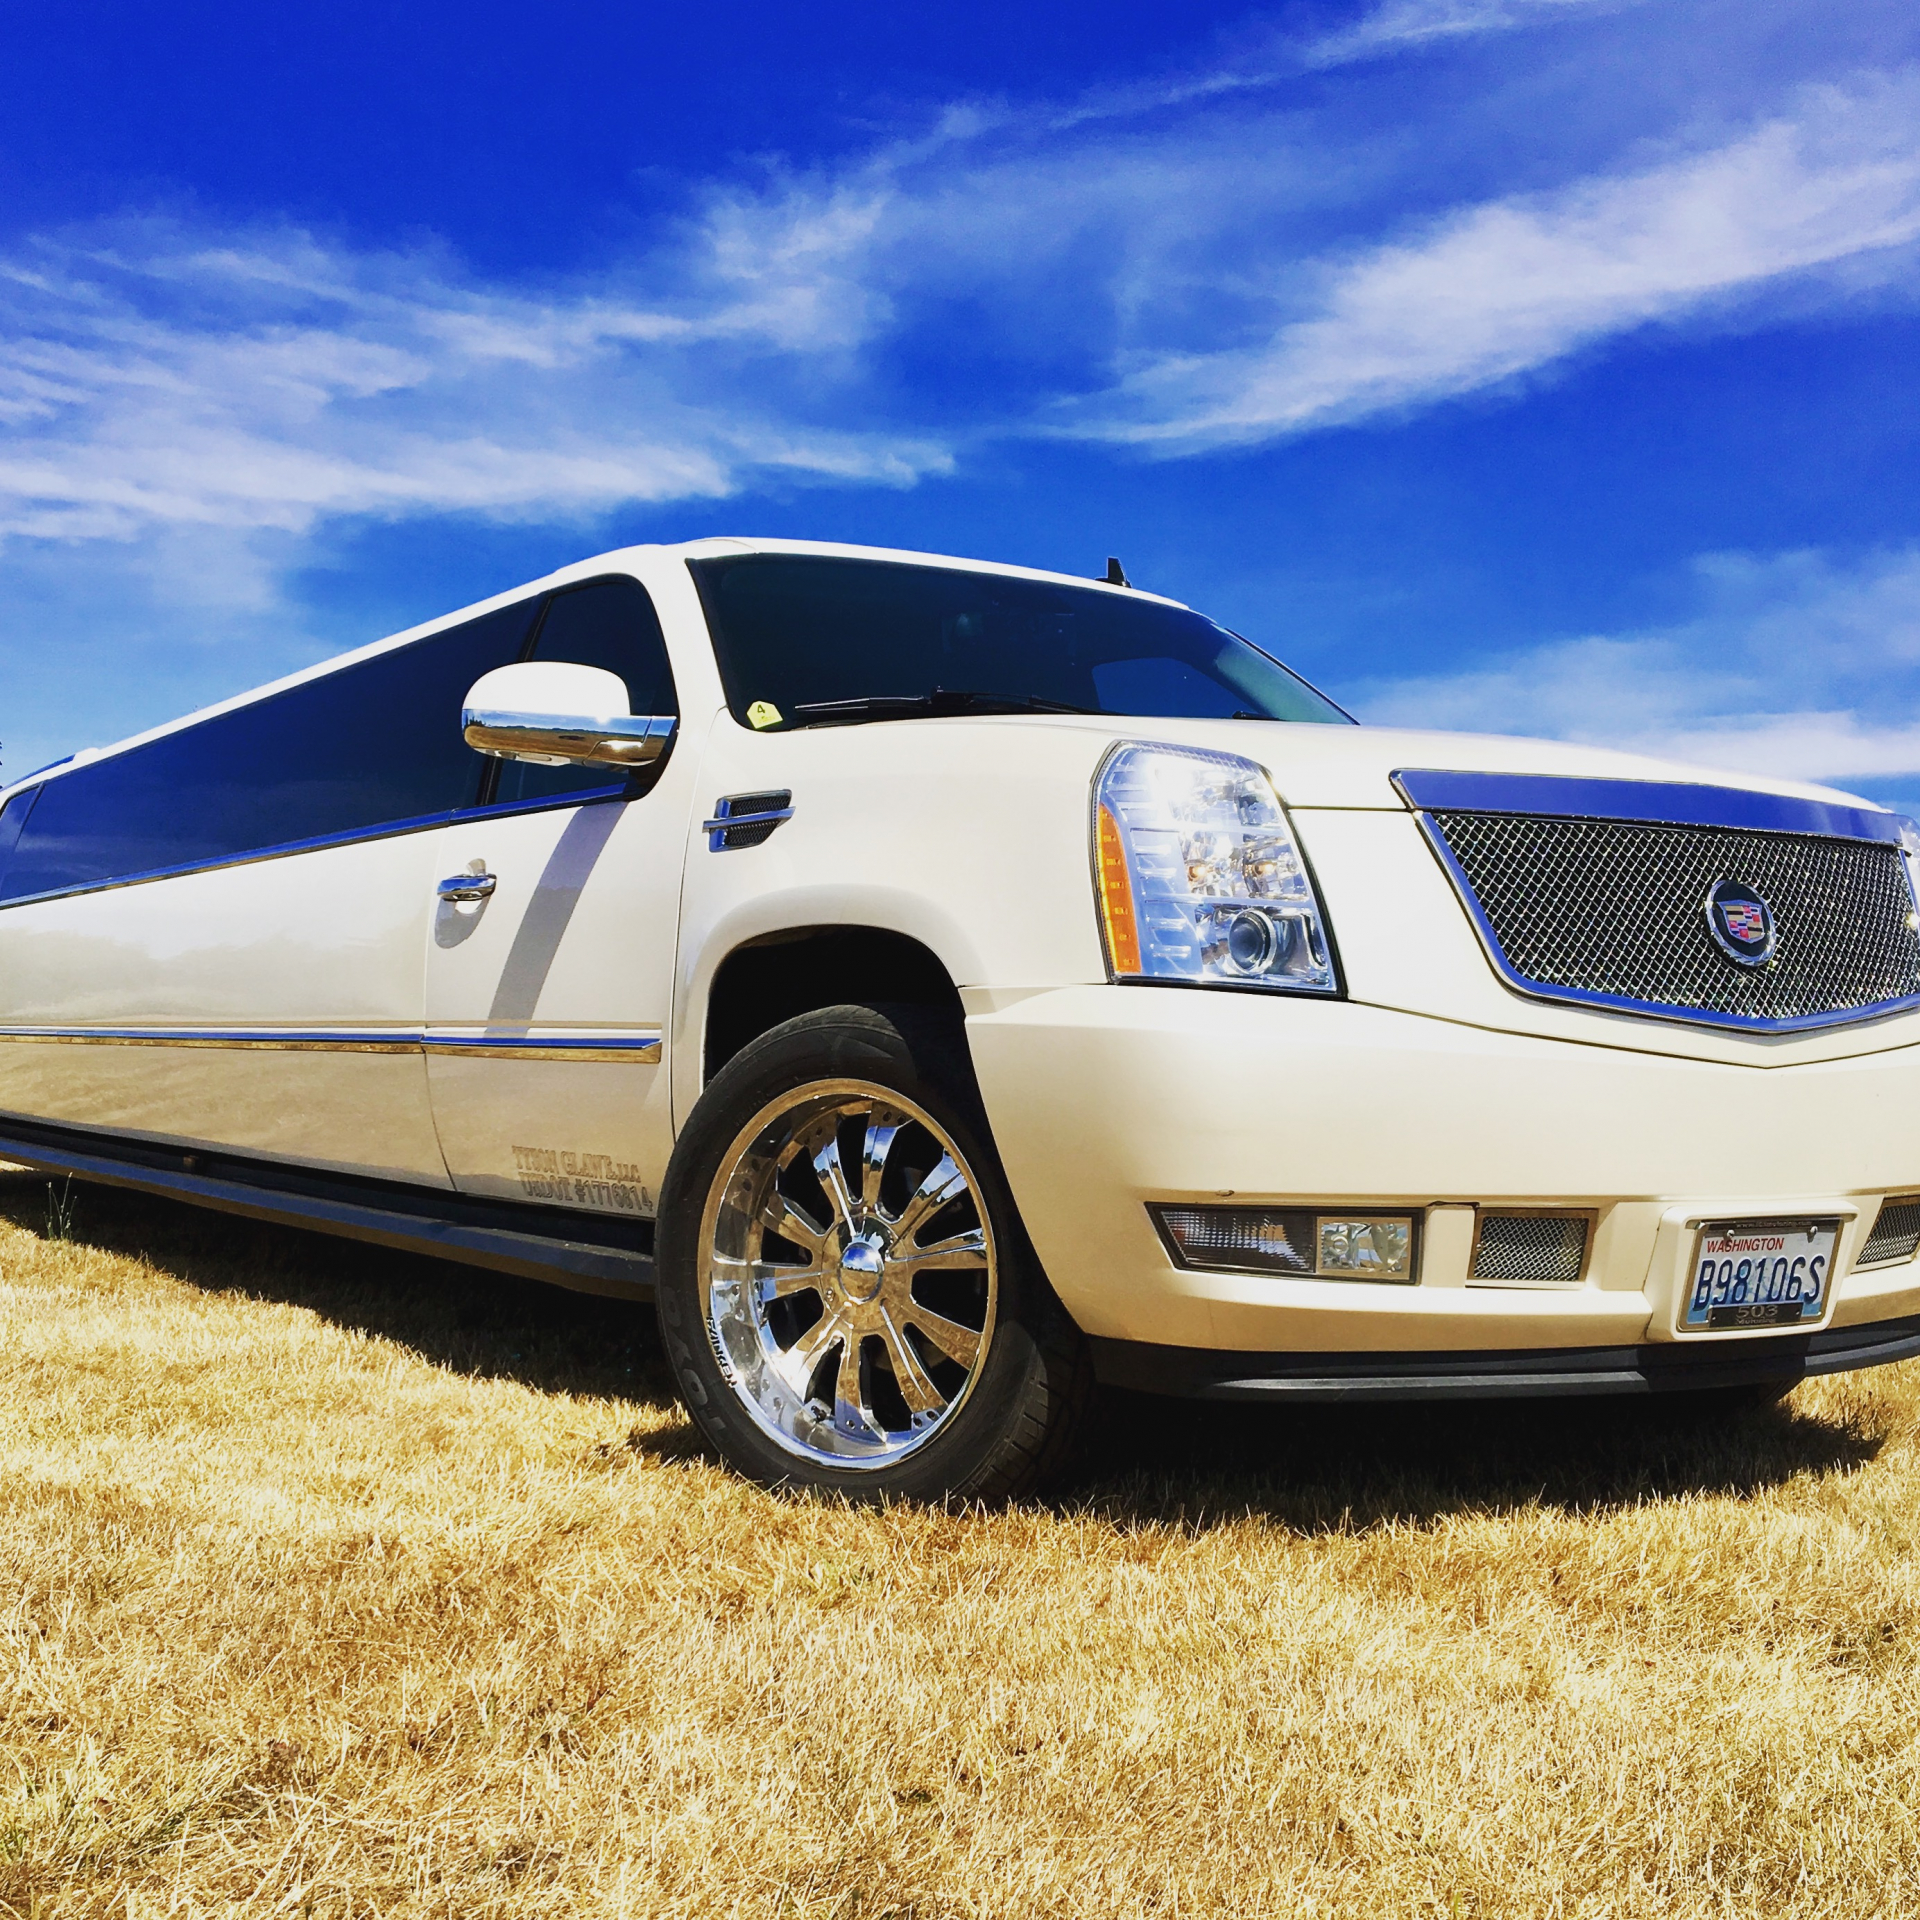 Cadillac Escalade Limousine 
Limo /
Portland, OR

 / Hourly (Other services) $180.00
